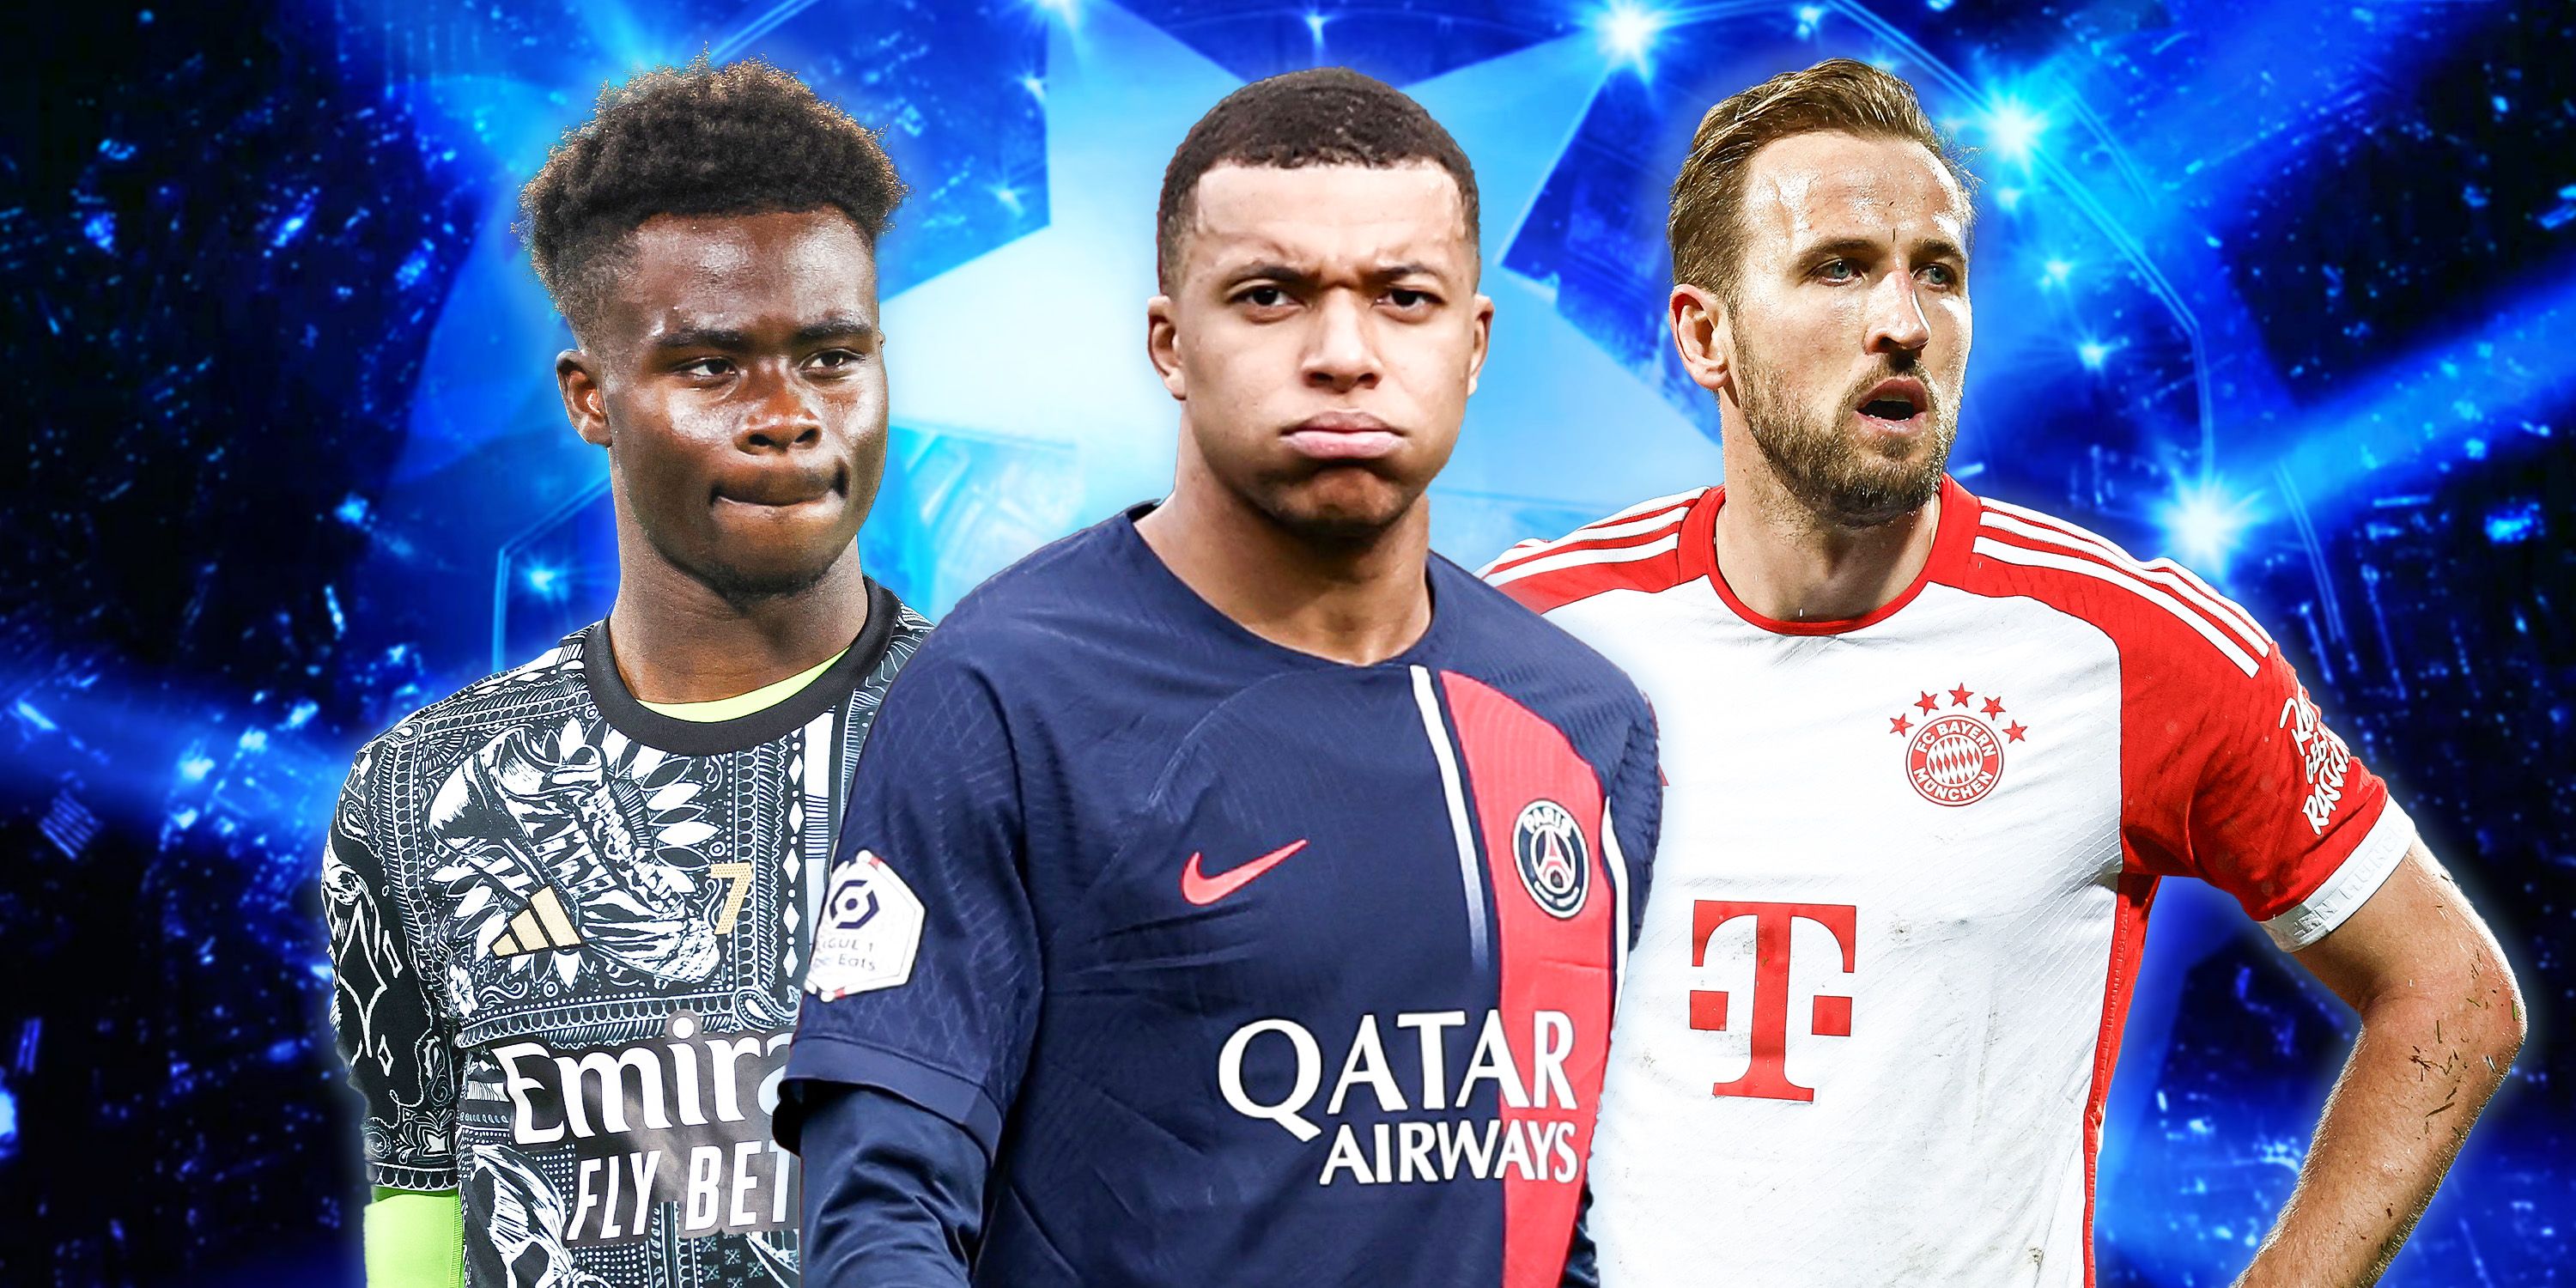 Harry Kane in a Bayern Munich shirt, Kylian Mbappe in a PSG shirt, Bukayo Saka in an Arsenal shirt - all looking unhappy with Champions League theme in background